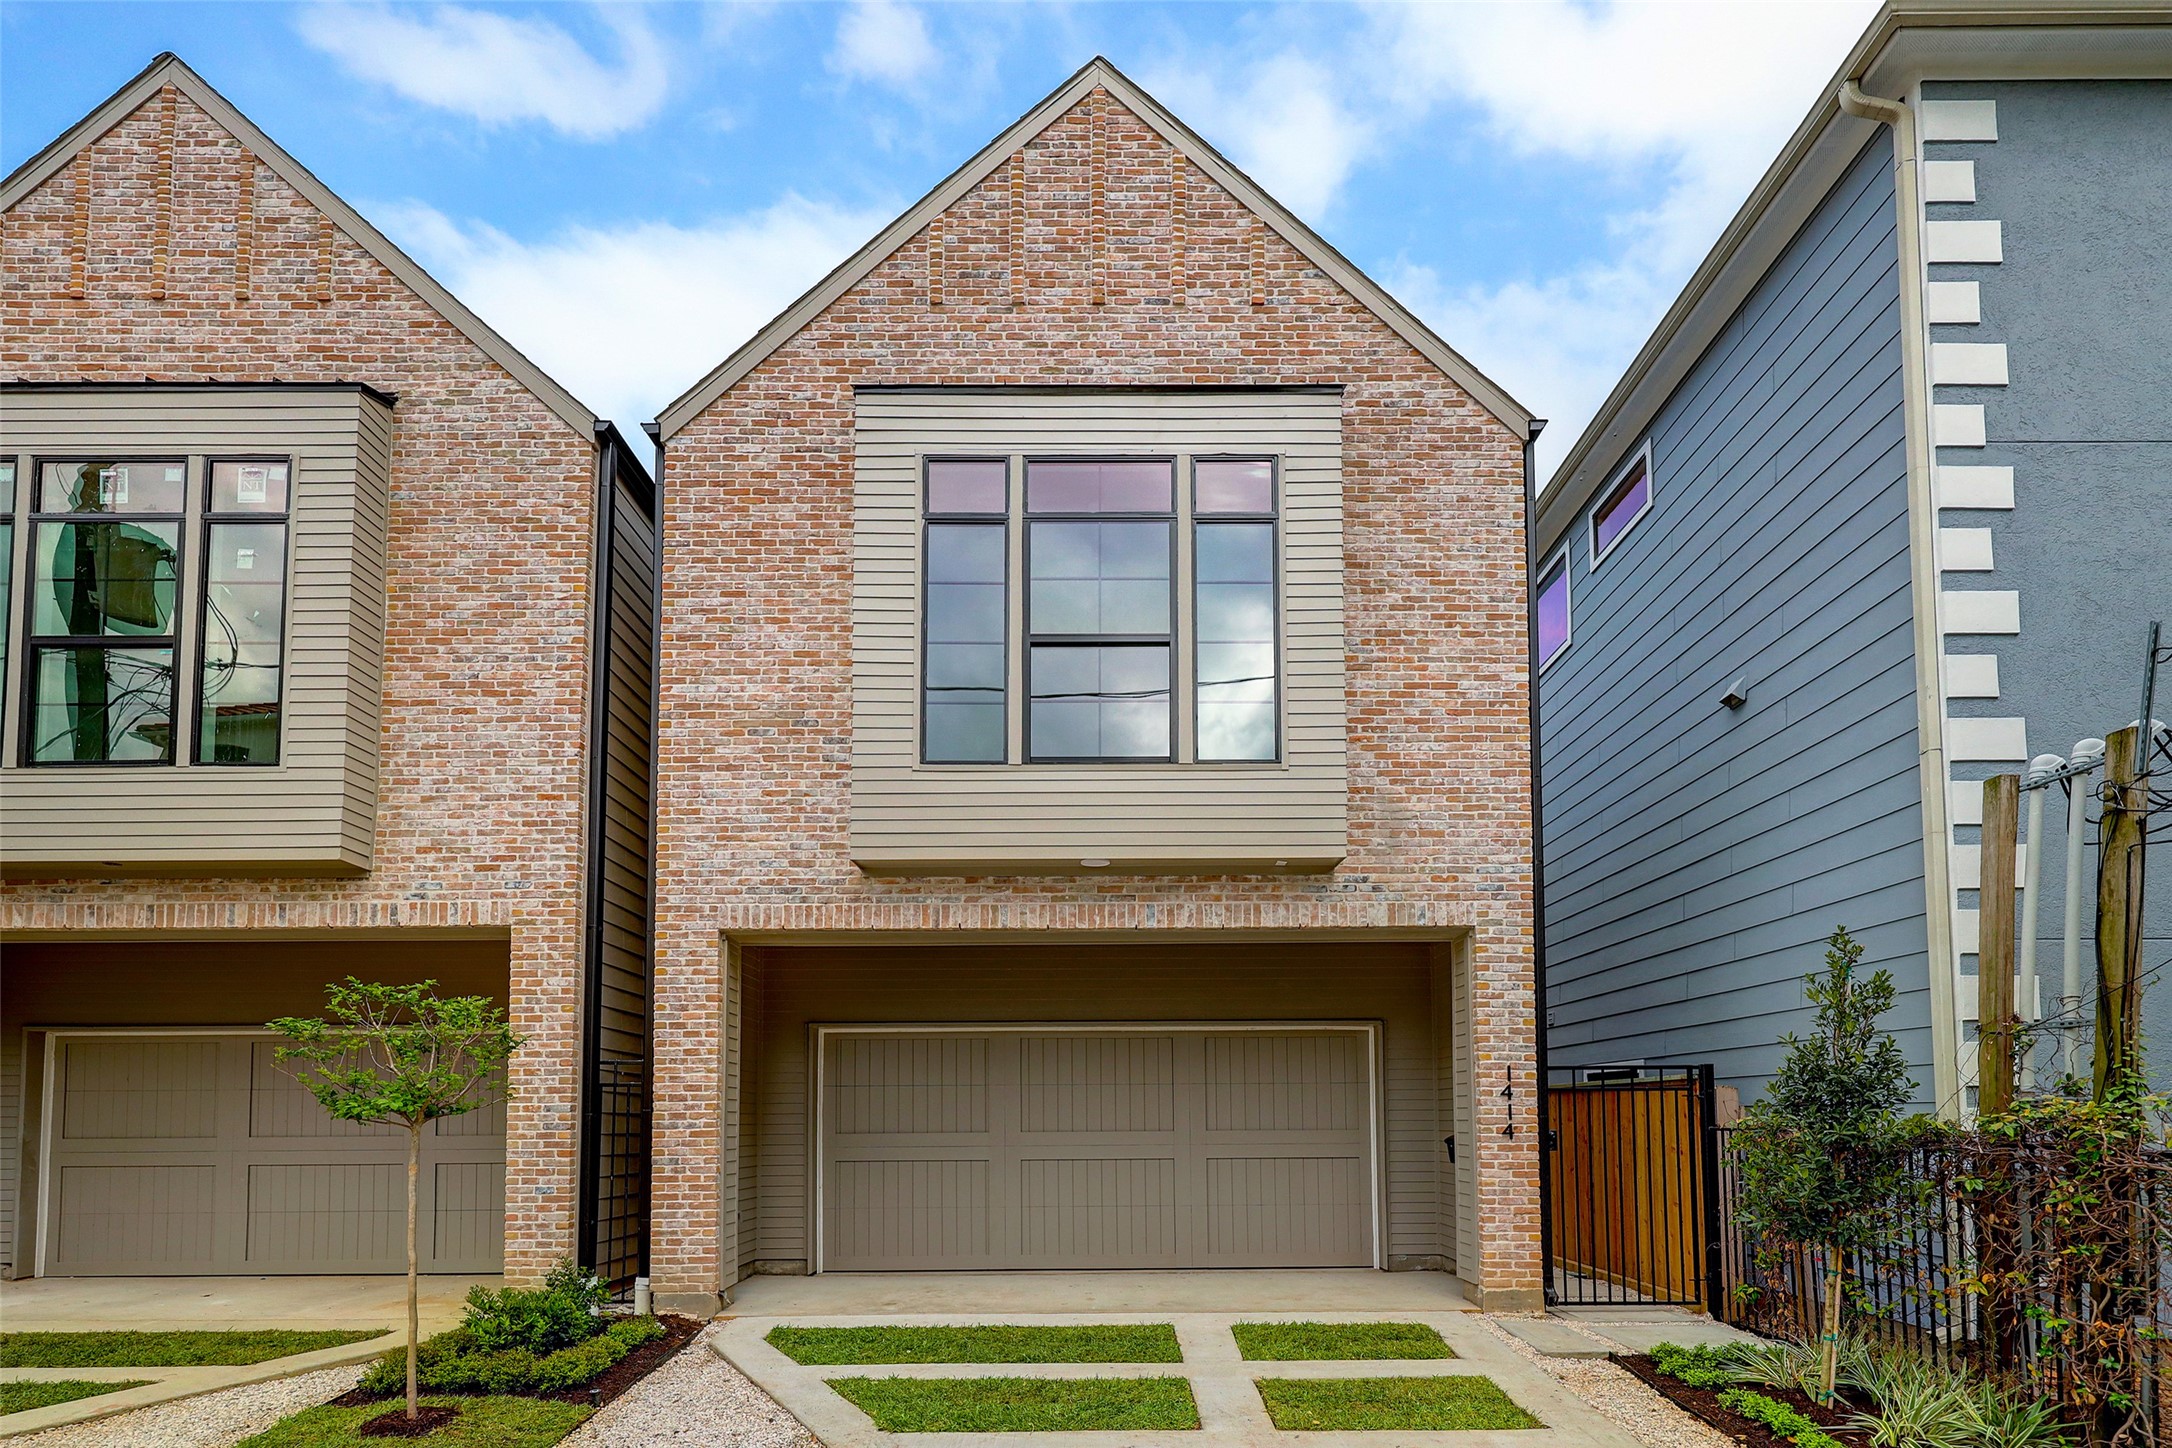 Brought to you by Ava Custom Homes, this extraordinary new home delivers dramatic curb appeal in the desirable Rice Military neighborhood. Inside, discover 3 bedrooms, 3.1 bathrooms, and a wonderful indoor-outdoor flow thanks to outdoor space on both levels.
